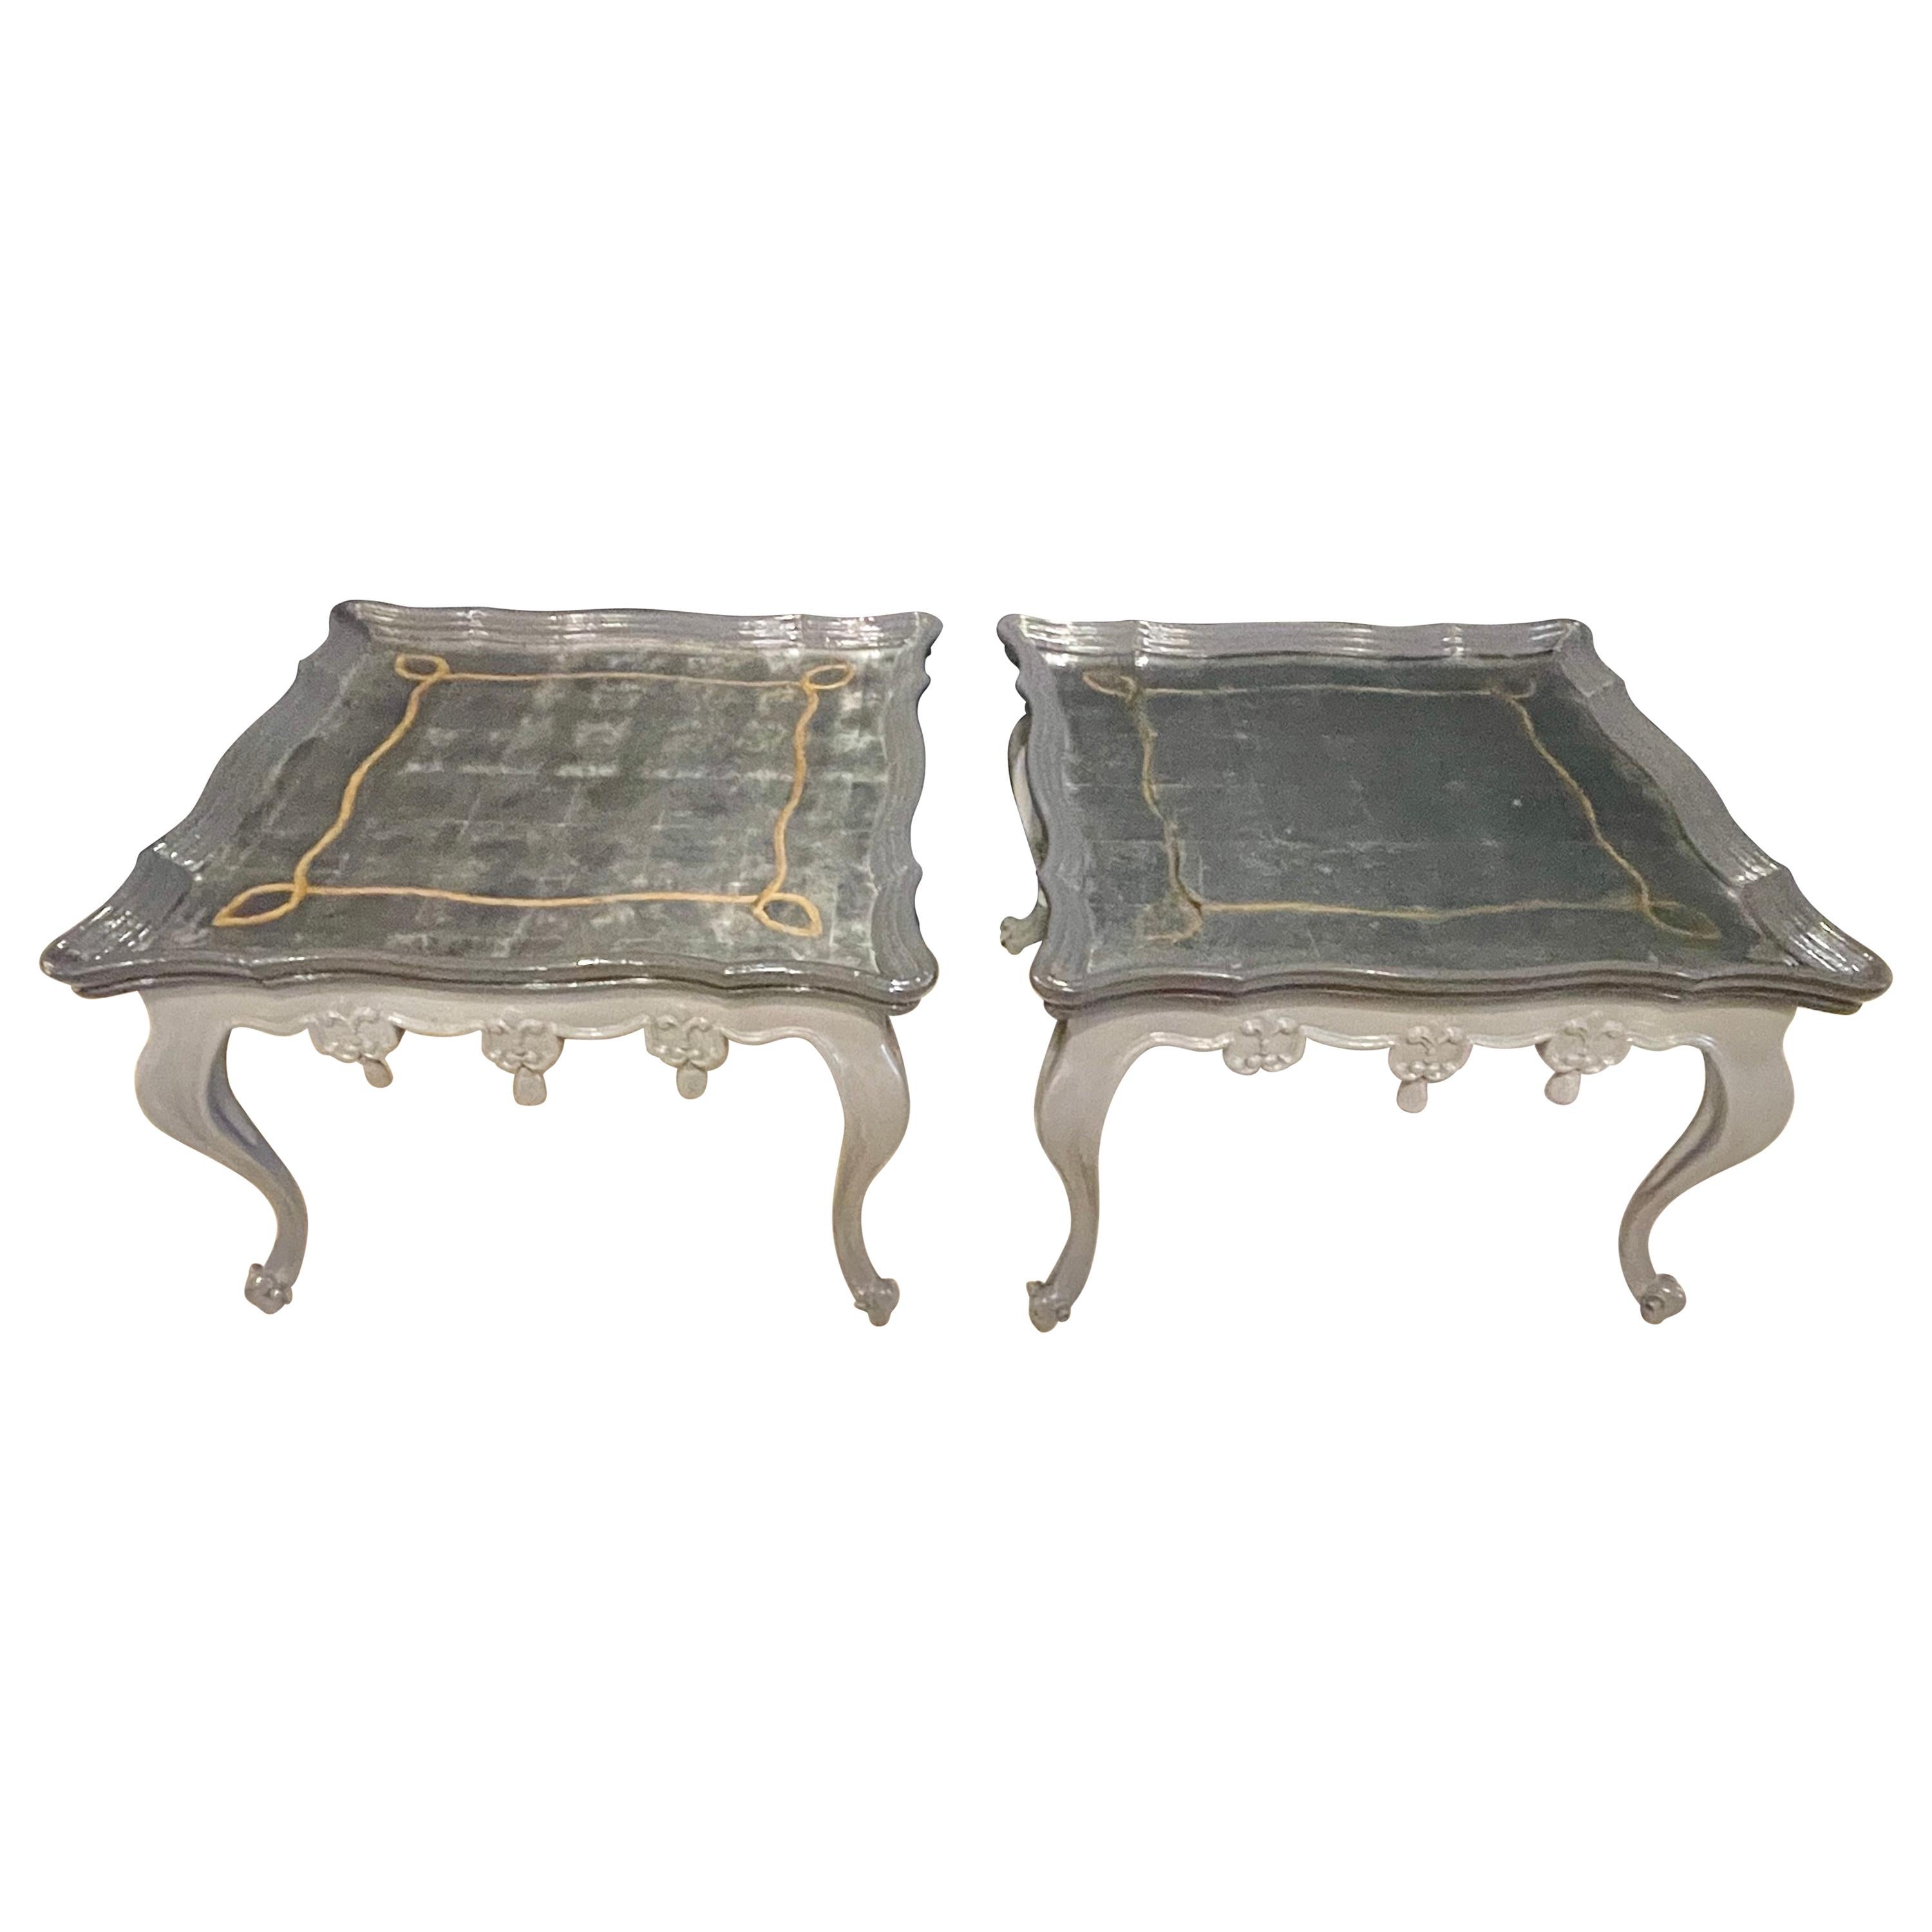 Pair of John Richards Painted Eglomise Mirrored Top Coffee Table Cocktail Table